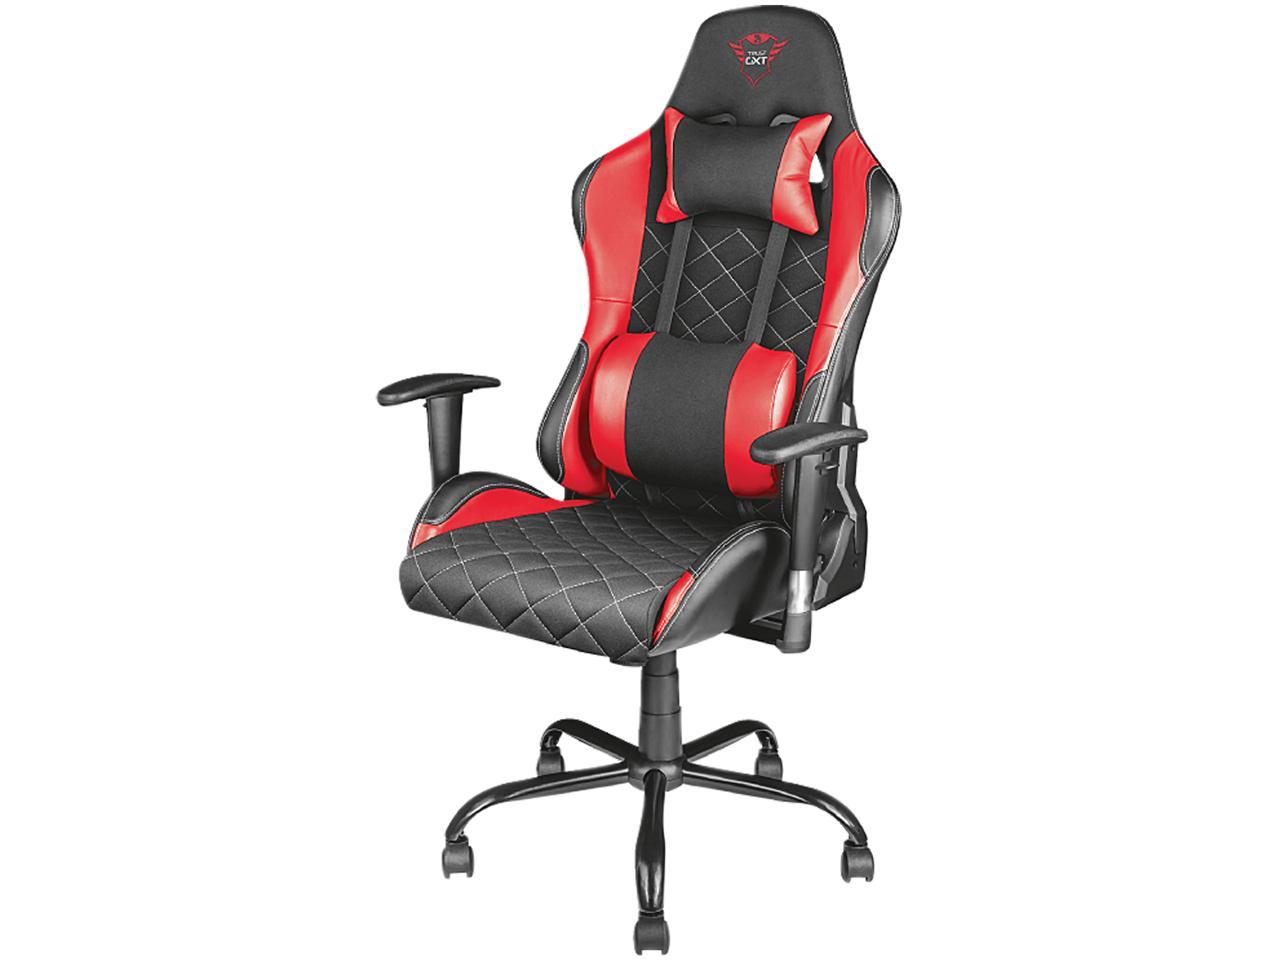 GXT RESTO Gaming Chair - Red - 22692 - Newegg.com